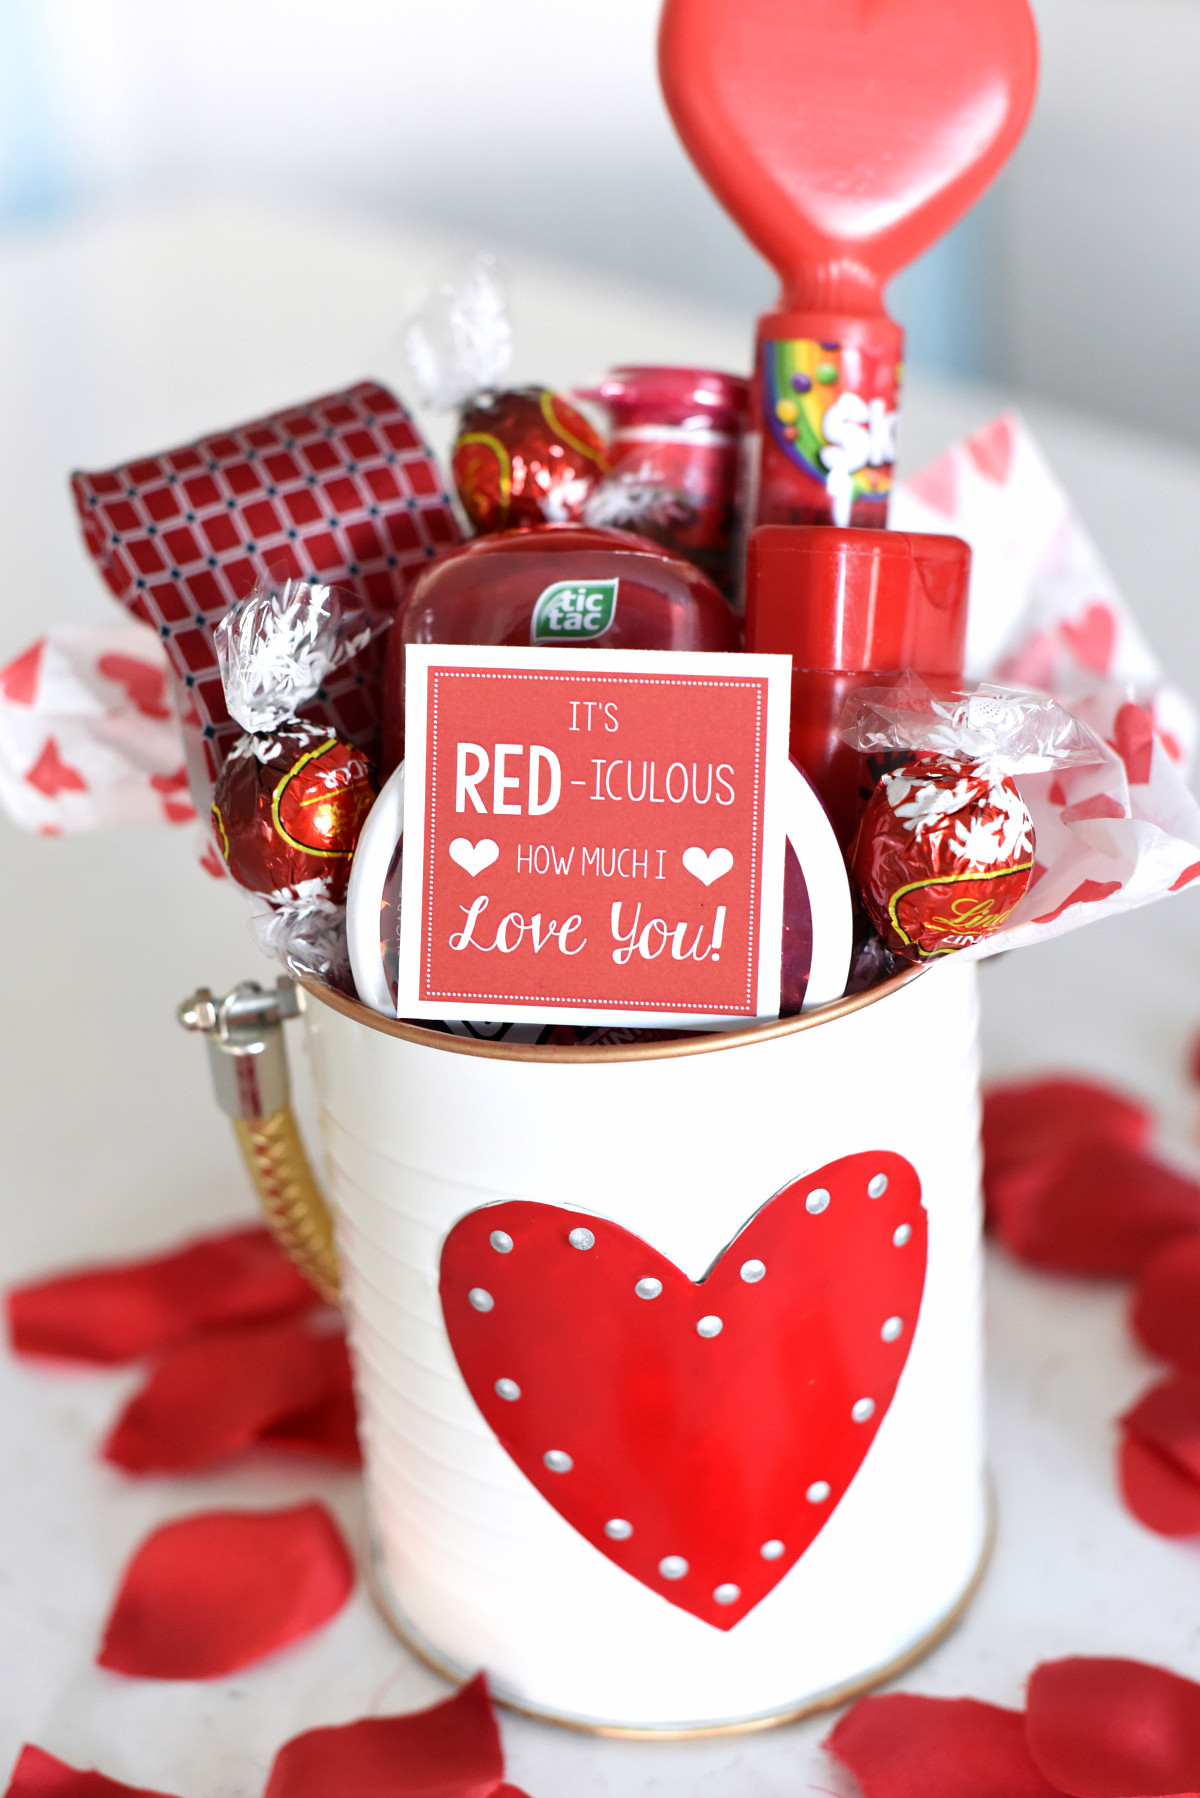 Valentines Day Gift Ideas For Boys
 25 DIY Valentine s Day Gift Ideas Teens Will Love